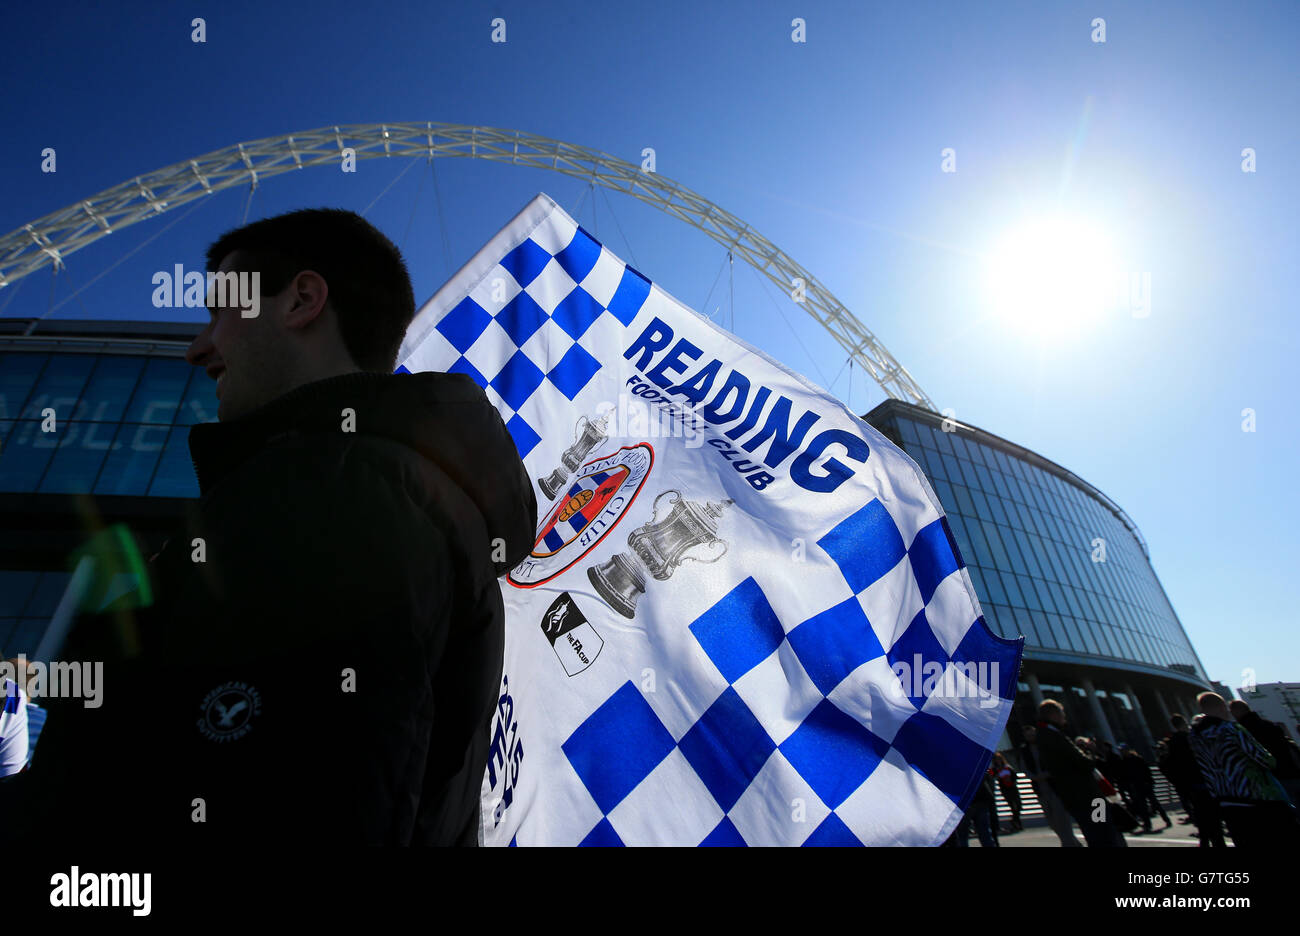 Soccer - FA Cup - Semi Final - Reading v Arsenal - Wembley Stadium. A Reading fan's flag flutters in the wind underneath the Wembley arch as the sun shines Stock Photo